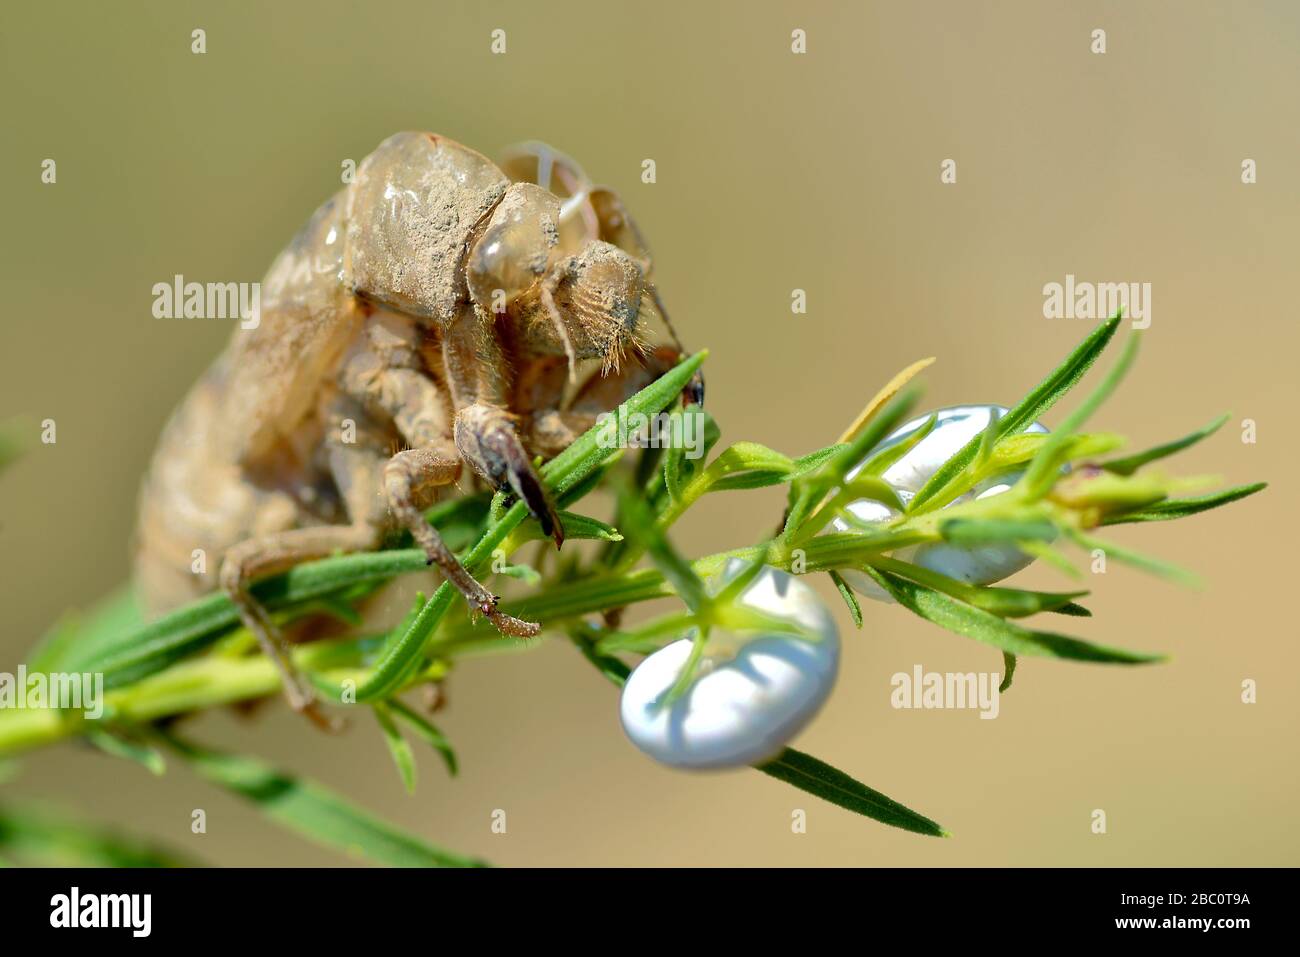 Exuvia of cicada (Lyristes plebejus) seen from front, on plant with two snails Stock Photo